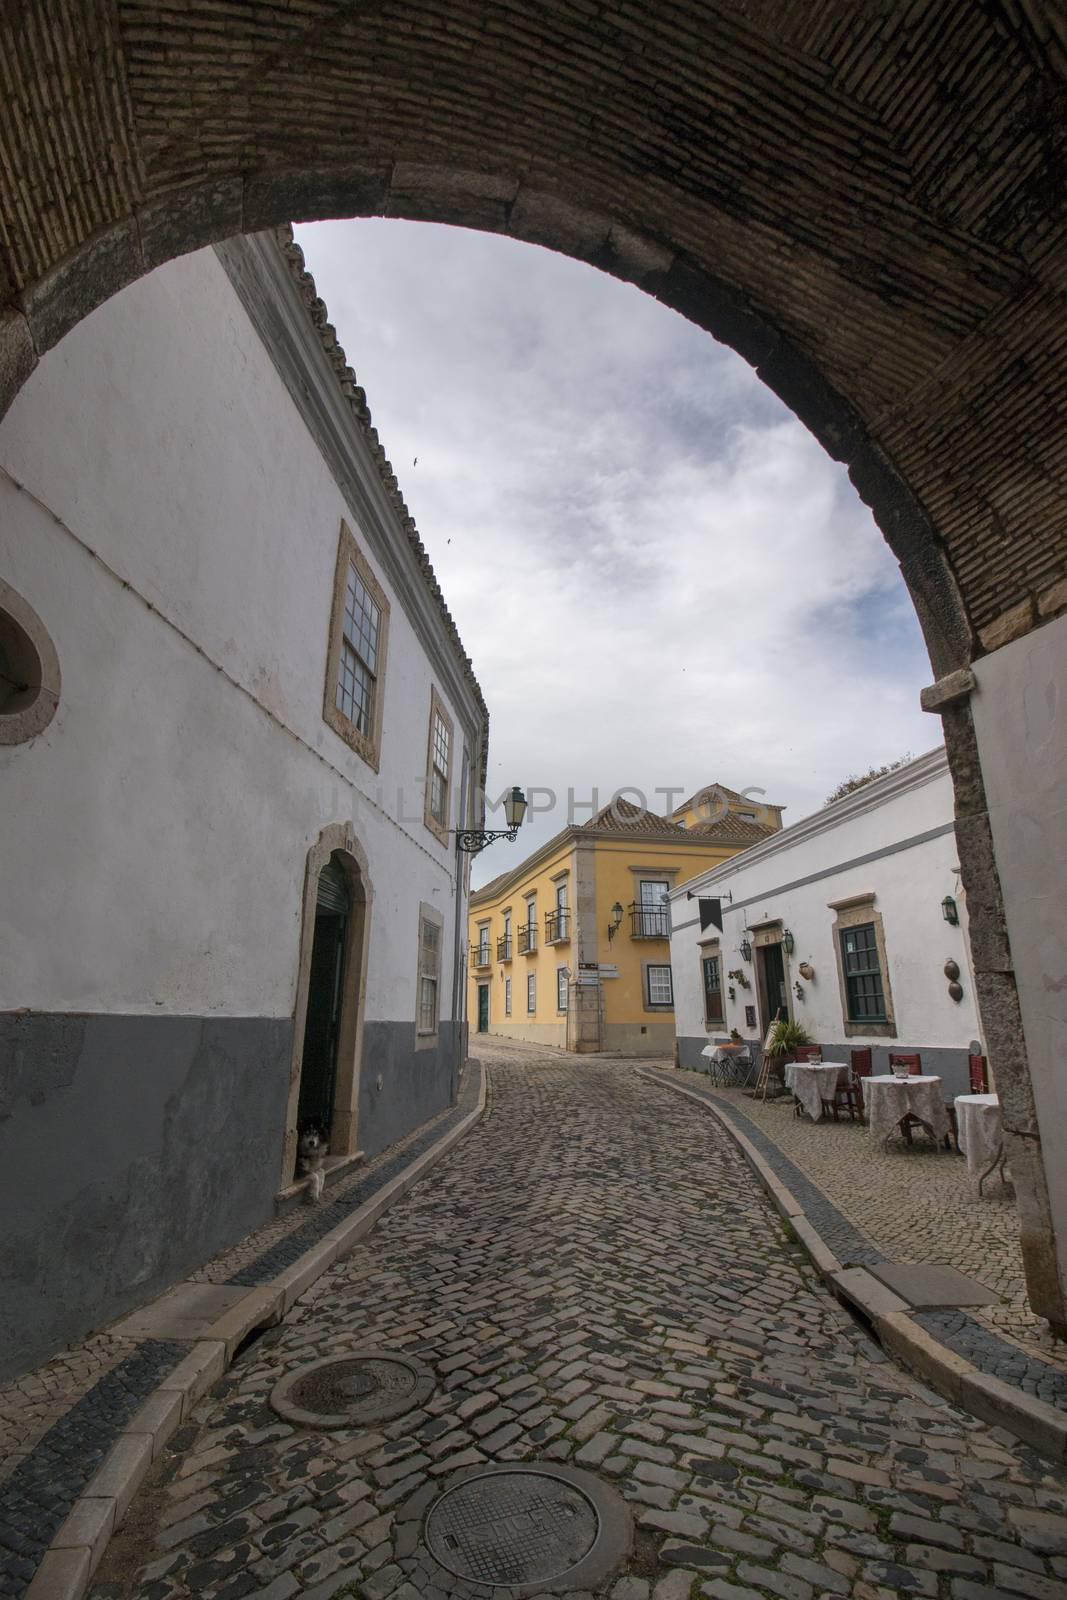 View of the Historical arch in Faro city, Portugal.